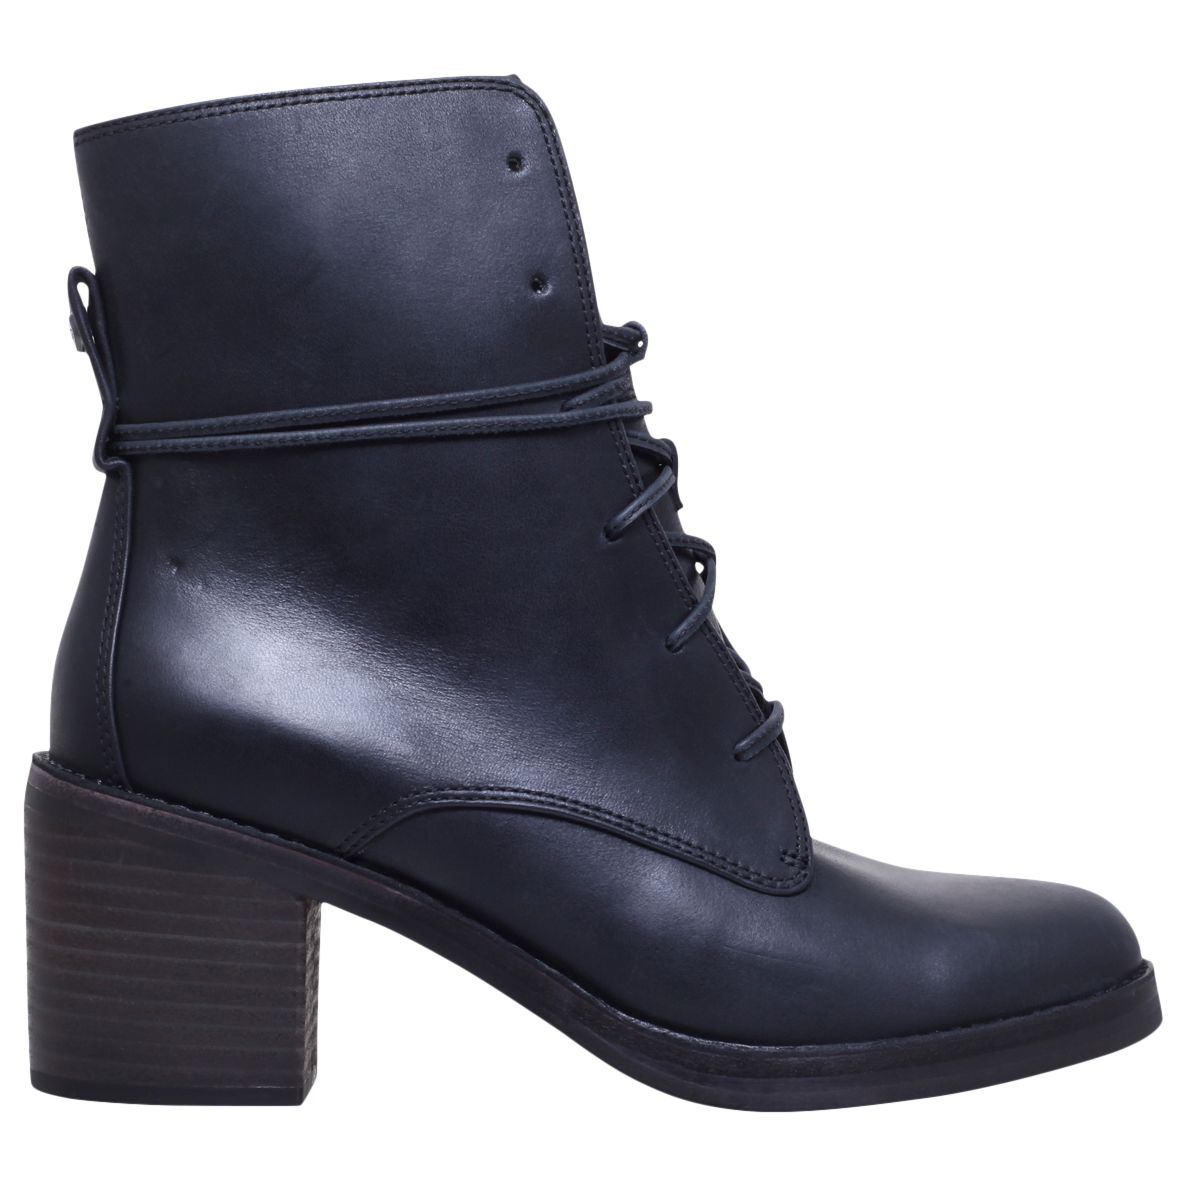 UGG Oriana Lace Up Ankle Boots, Black 